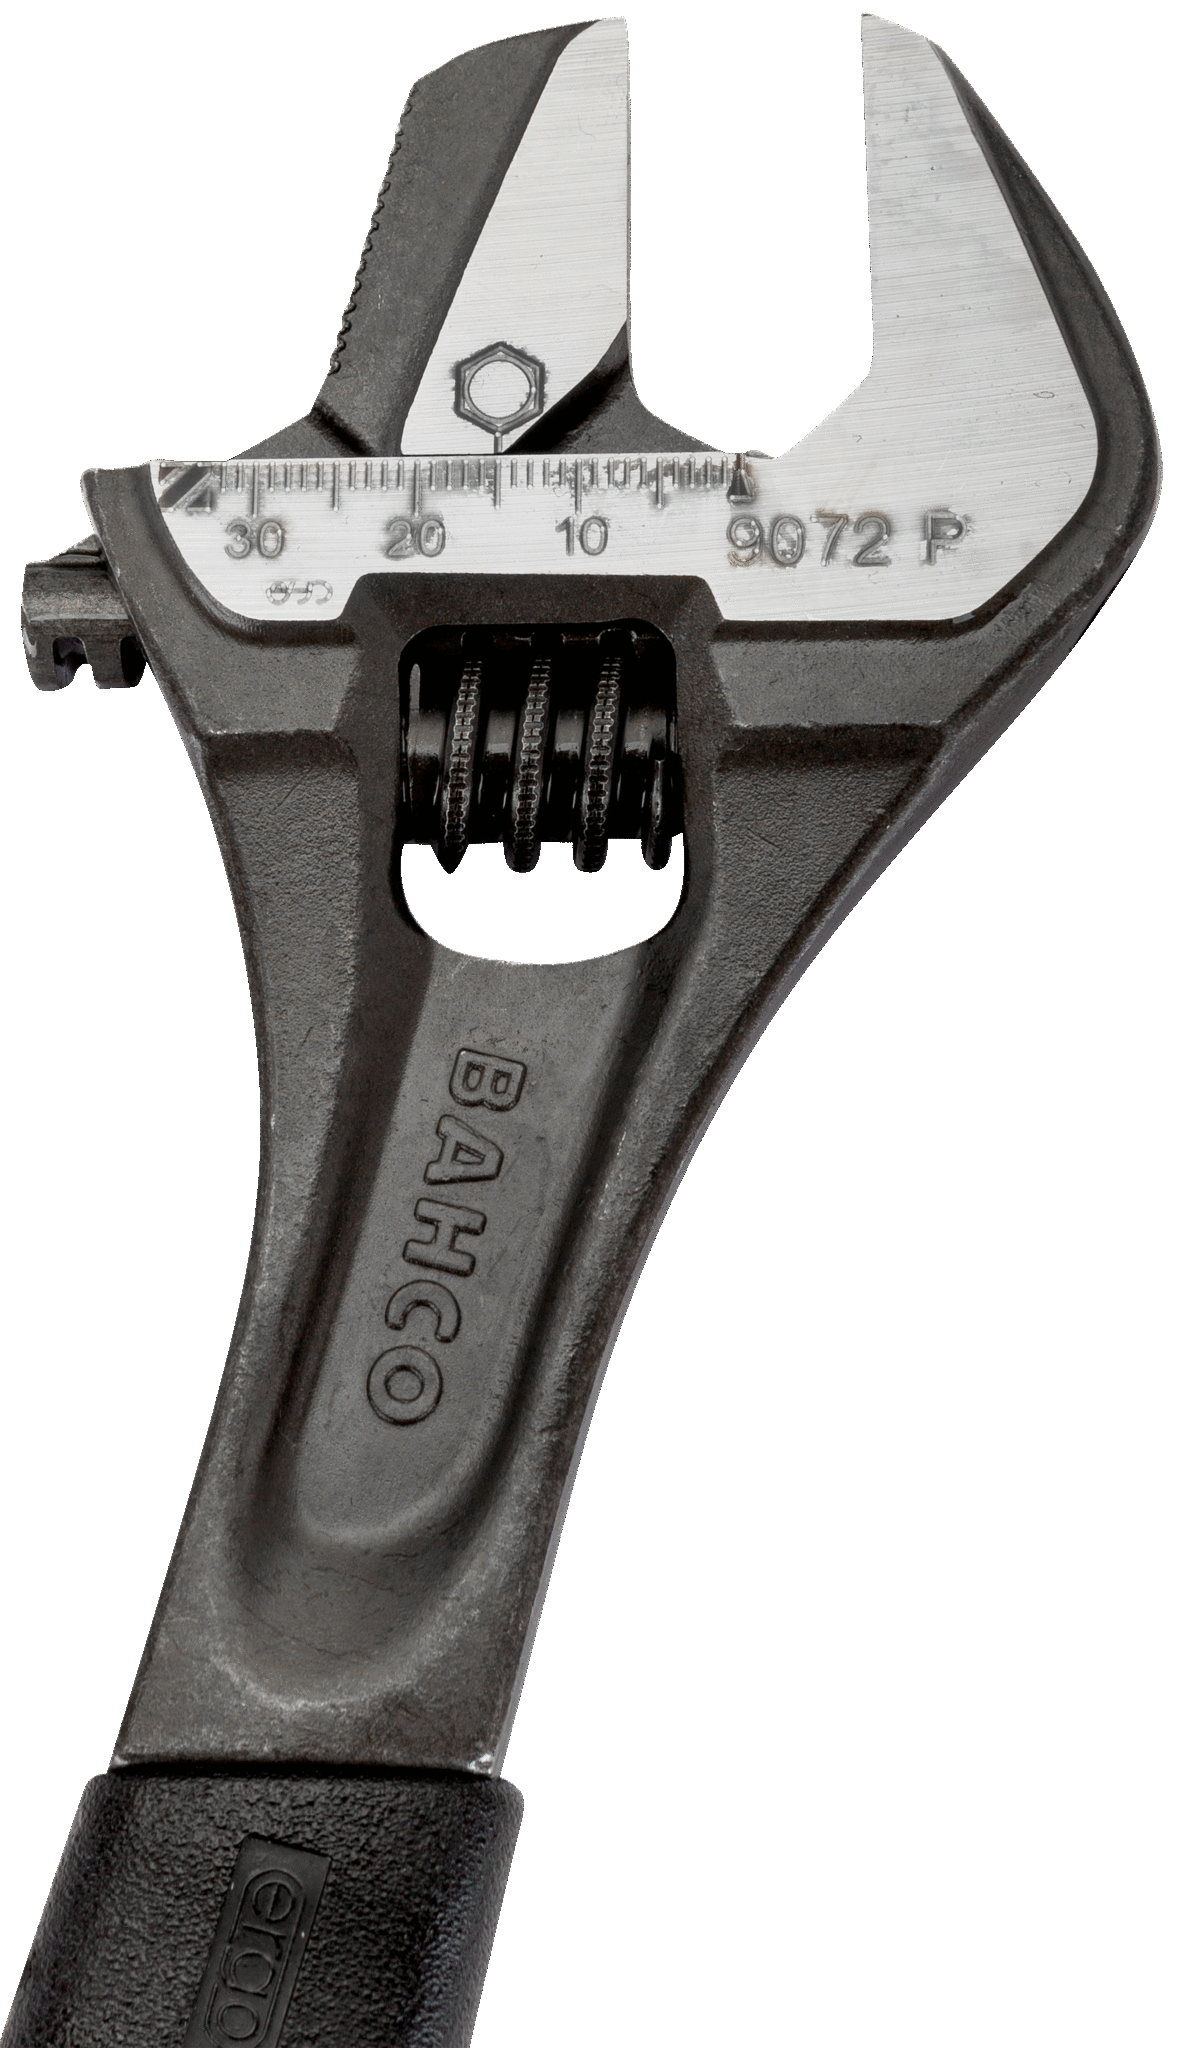 ERGO™ rubber handle central nut phosphated adjustable wrench, with reversible jaw - 9073P by Bahco